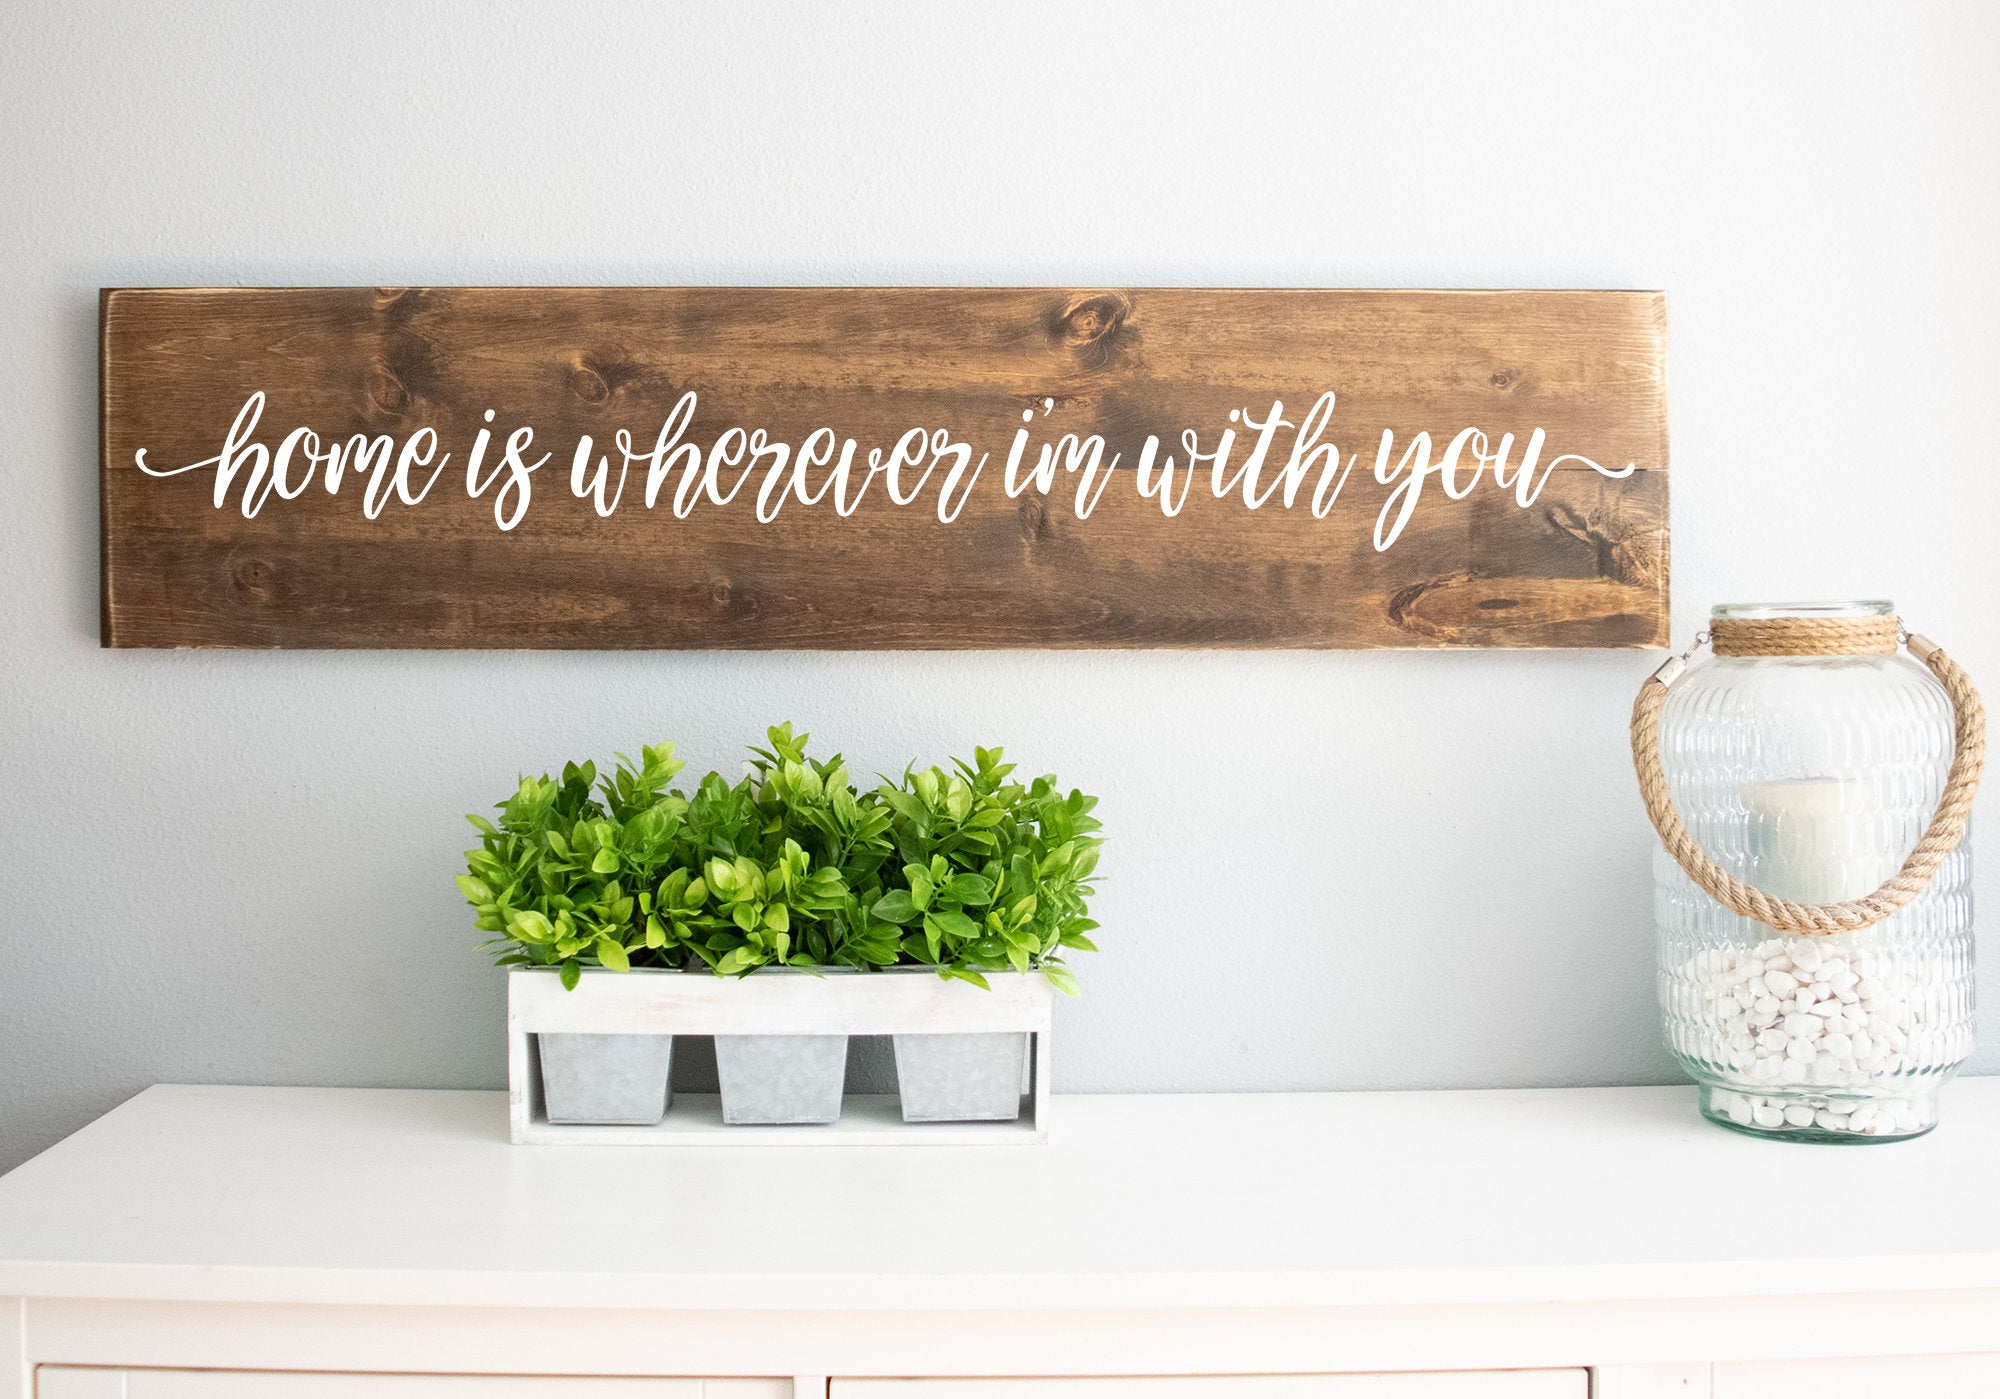 Home Is Wherever I Am With You Rustic Wood Sign – Master Bedroom Wooden Home Wall Décor - Farmhouse Bedroom Above Bed Wood Sign